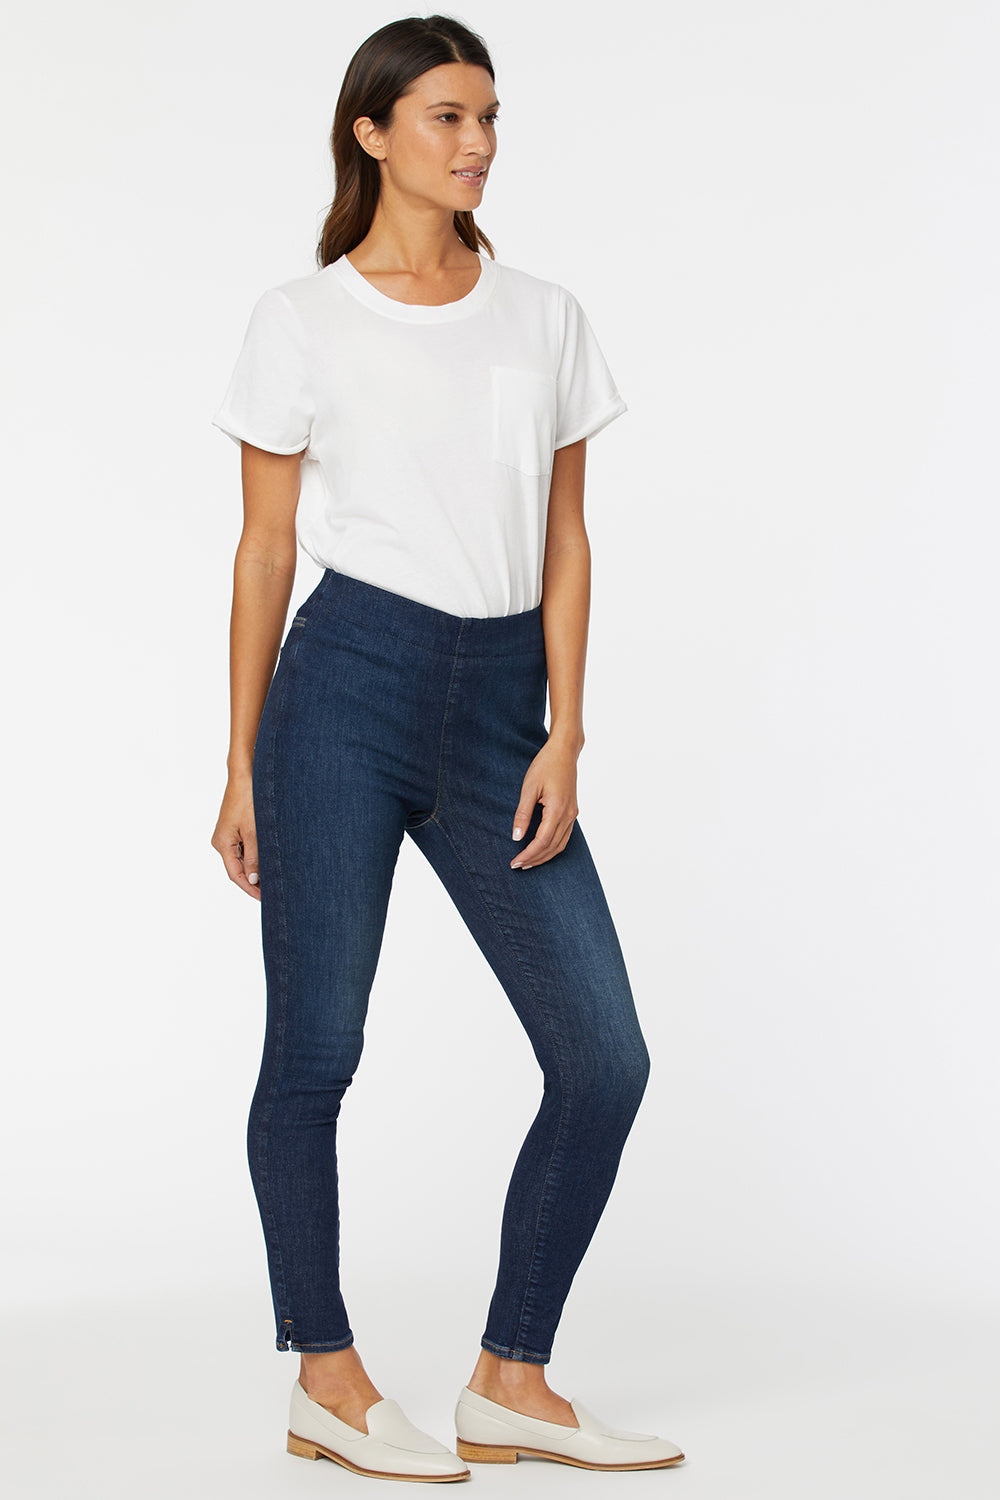 Super Skinny Ankle Pull-On Jeans In Petite In SpanSpring™ Denim